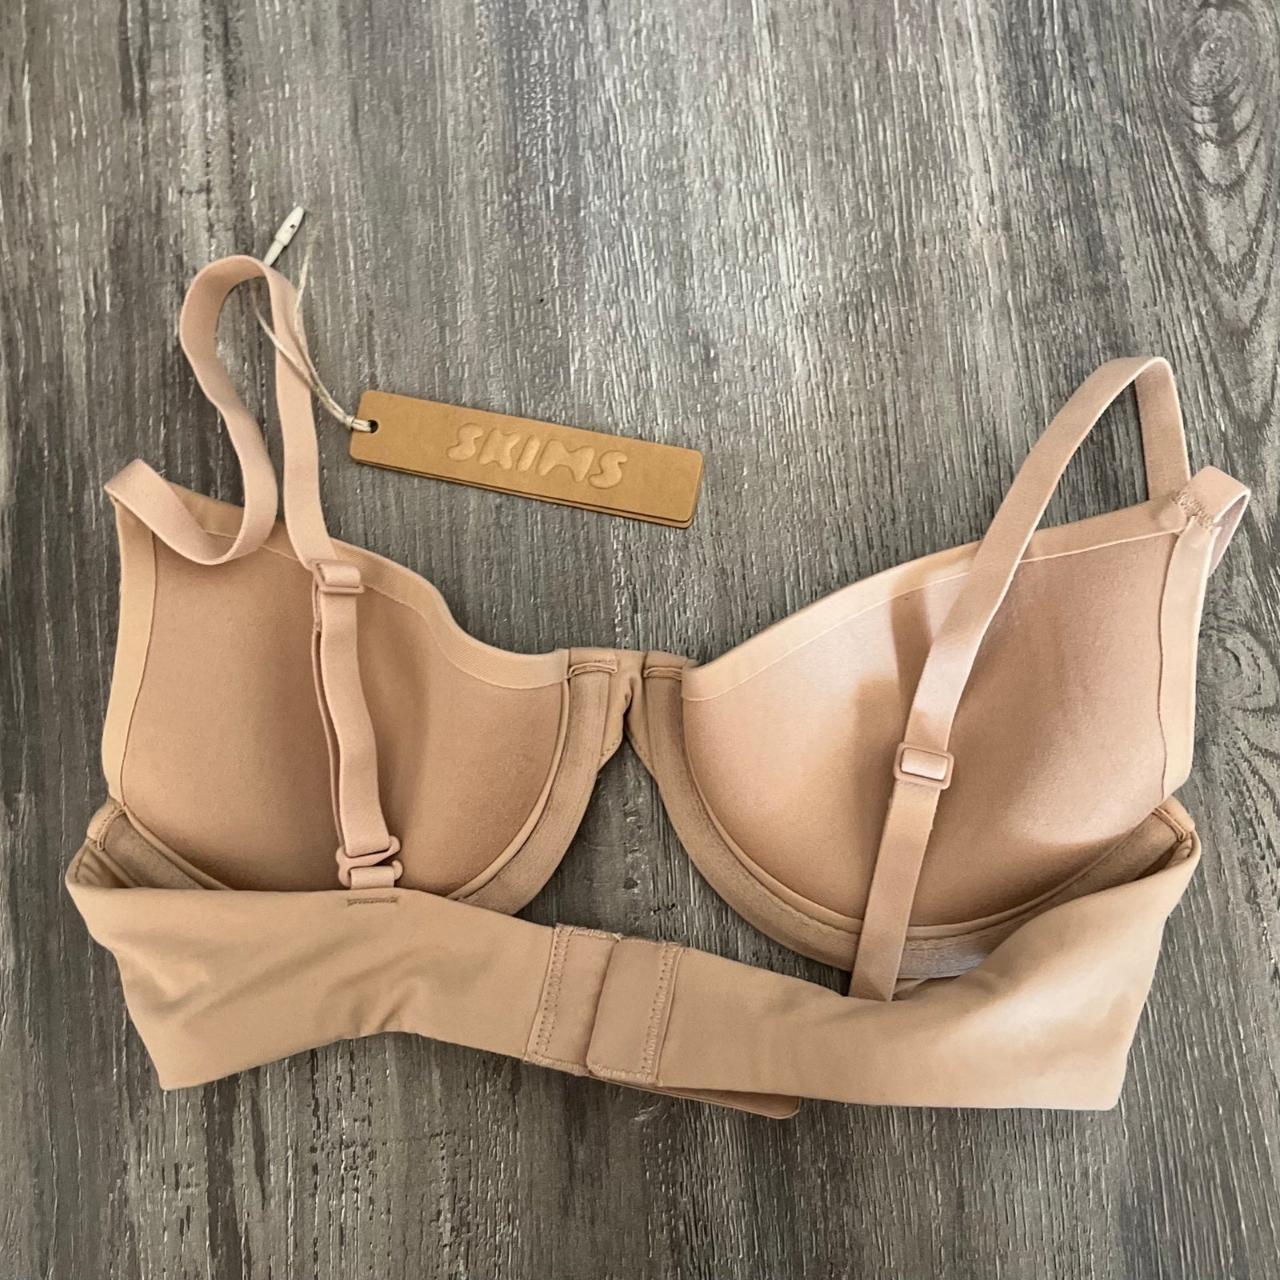 New Skims Fits Everybody Plunge Bra in Clay. Size 32A - Depop